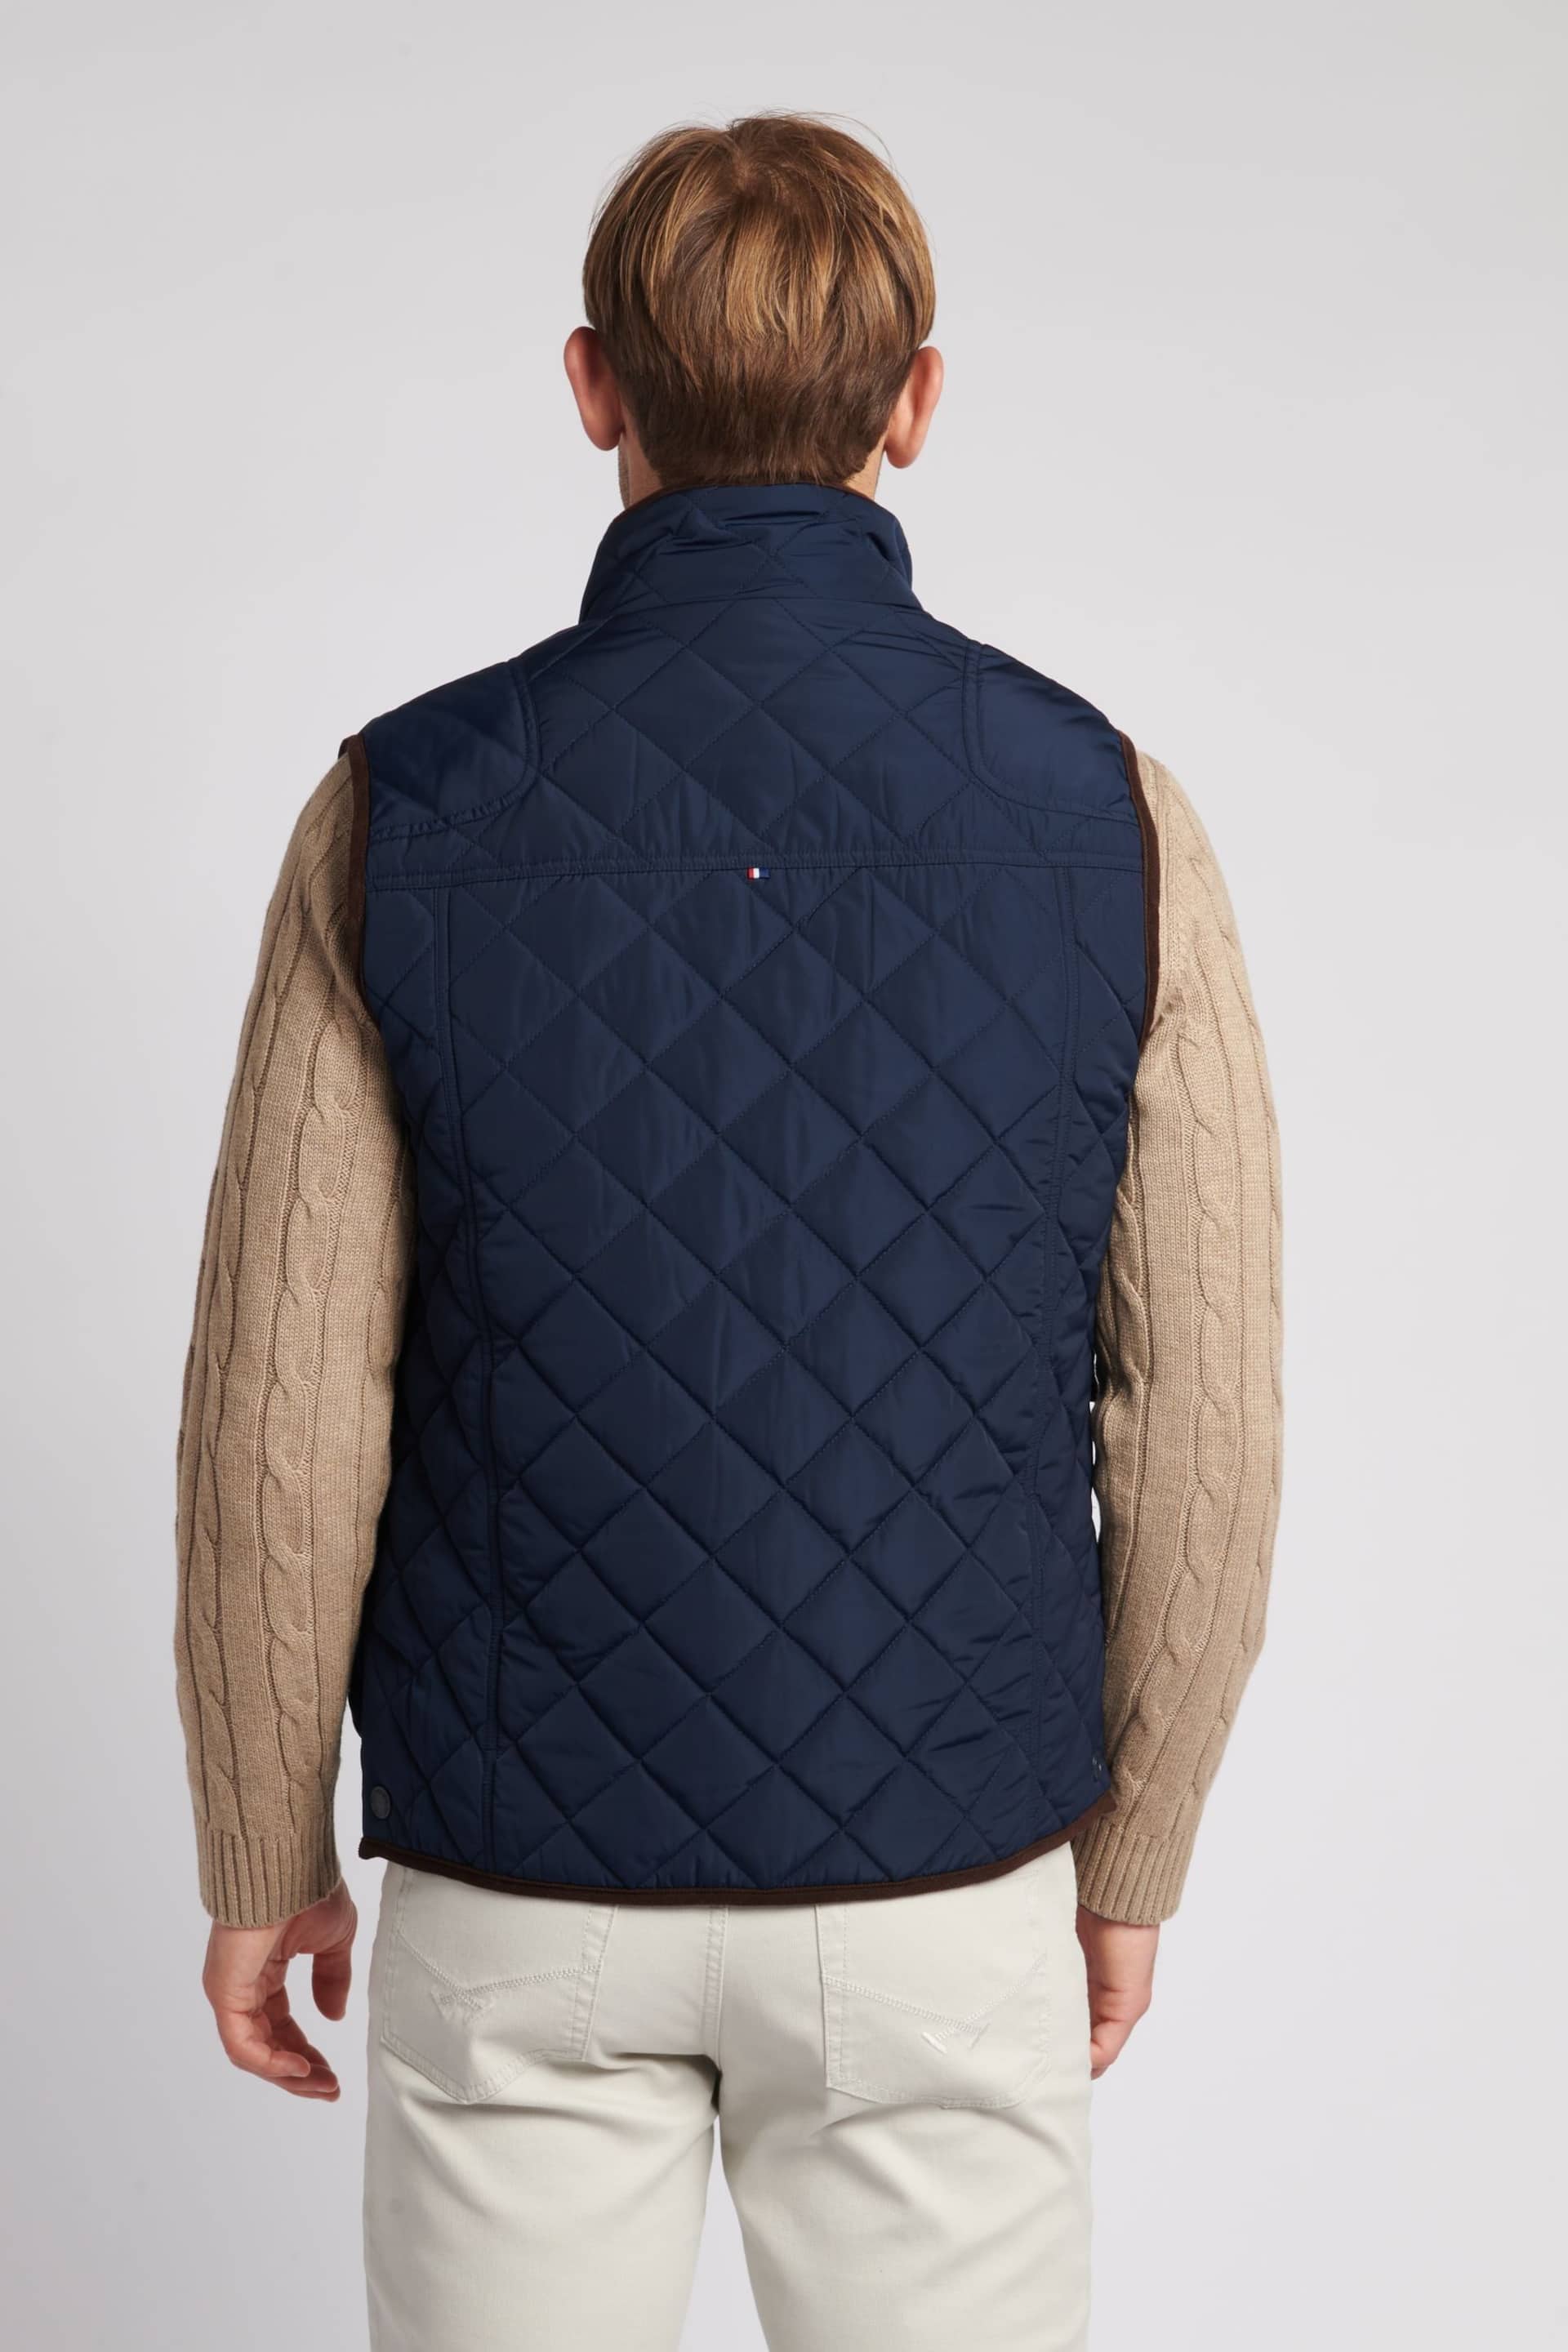 U.S. Polo Assn. Mens Blue Quilted Hacking Gilet - Image 2 of 8